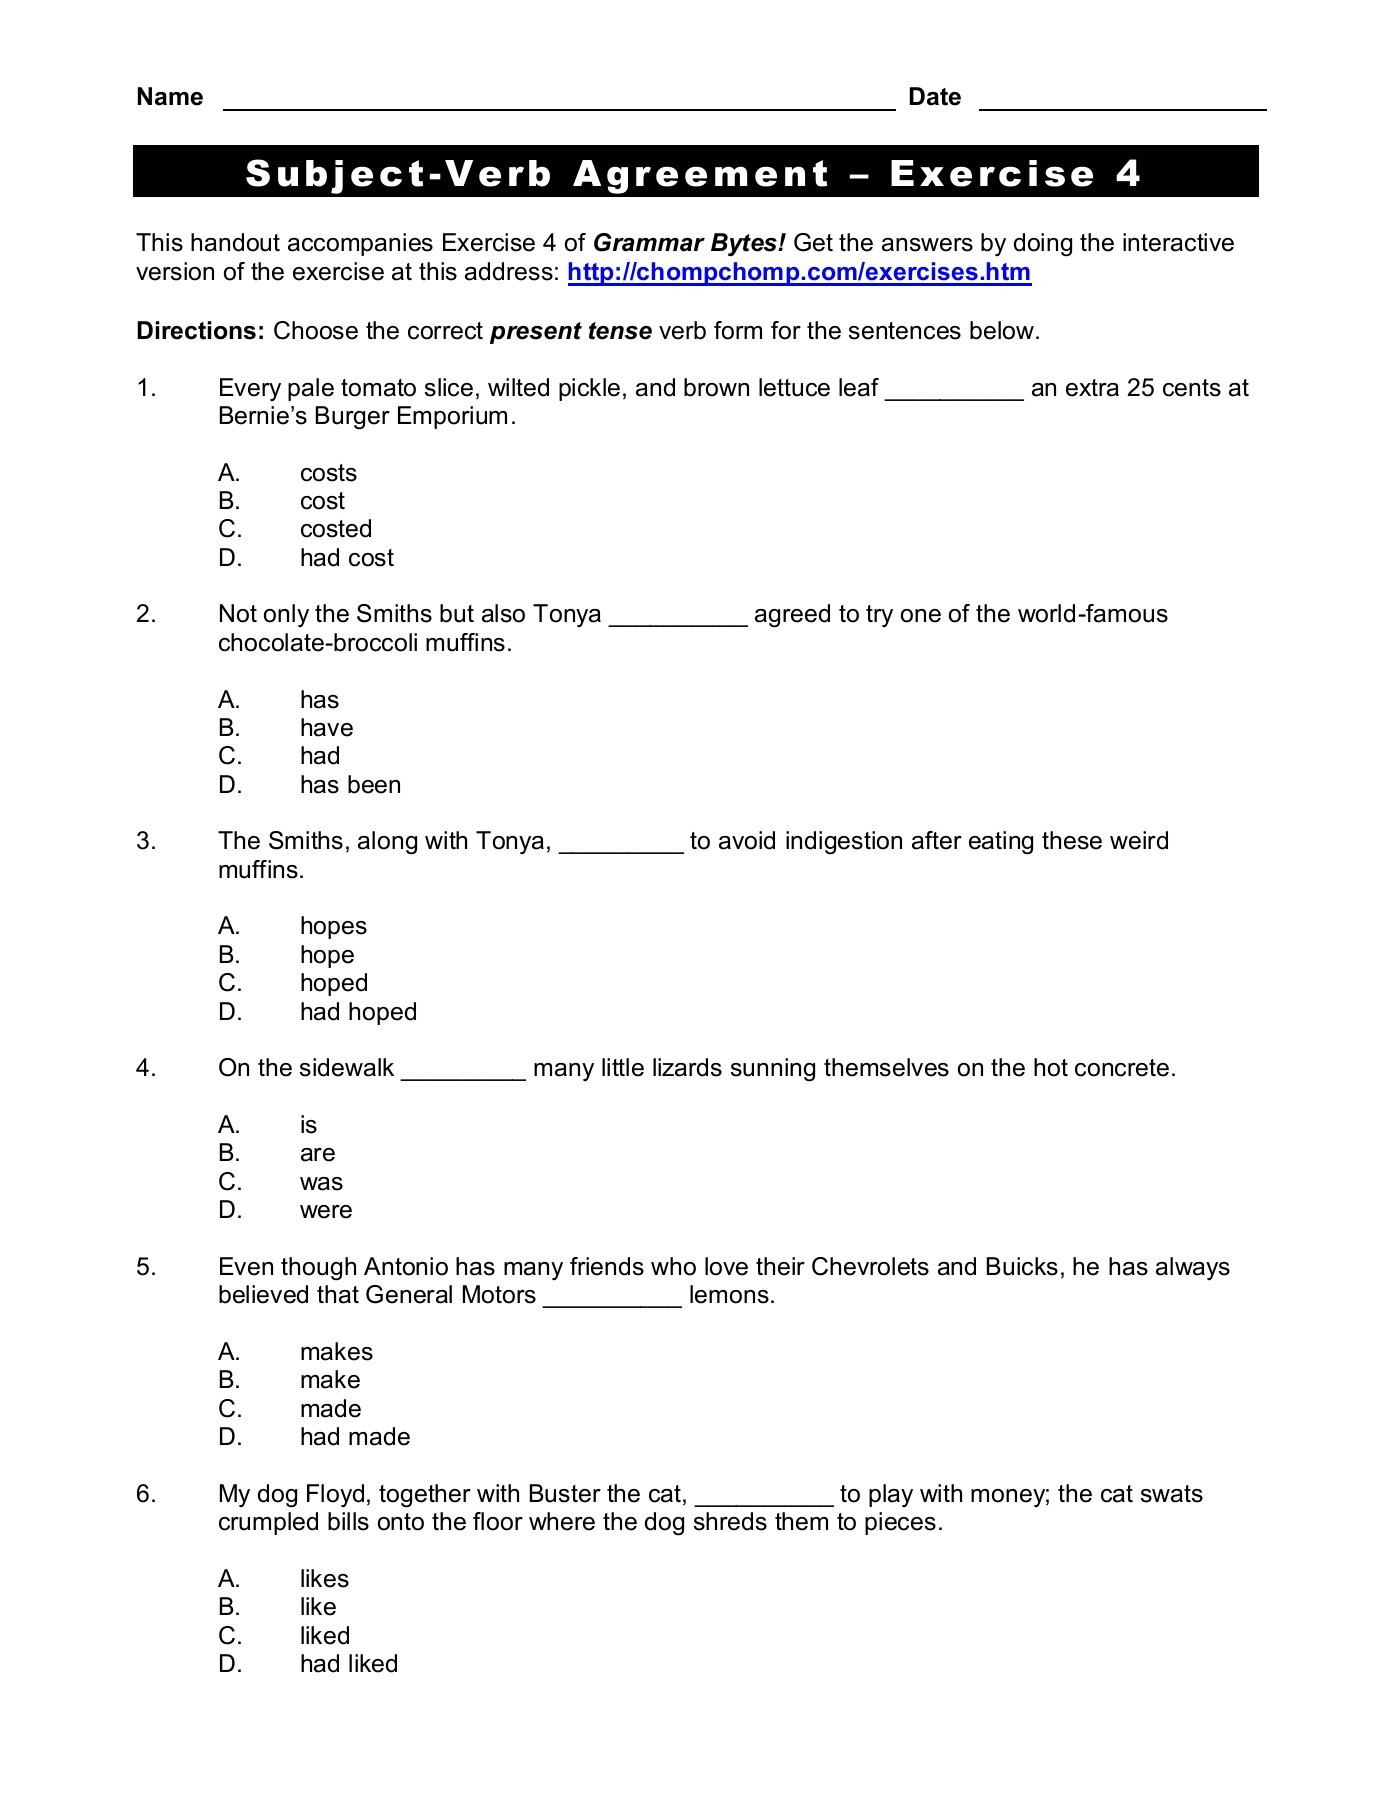 Subject Of Verb Agreement Subject Verb Agreement Exercise 4 Pages 1 4 Text Version